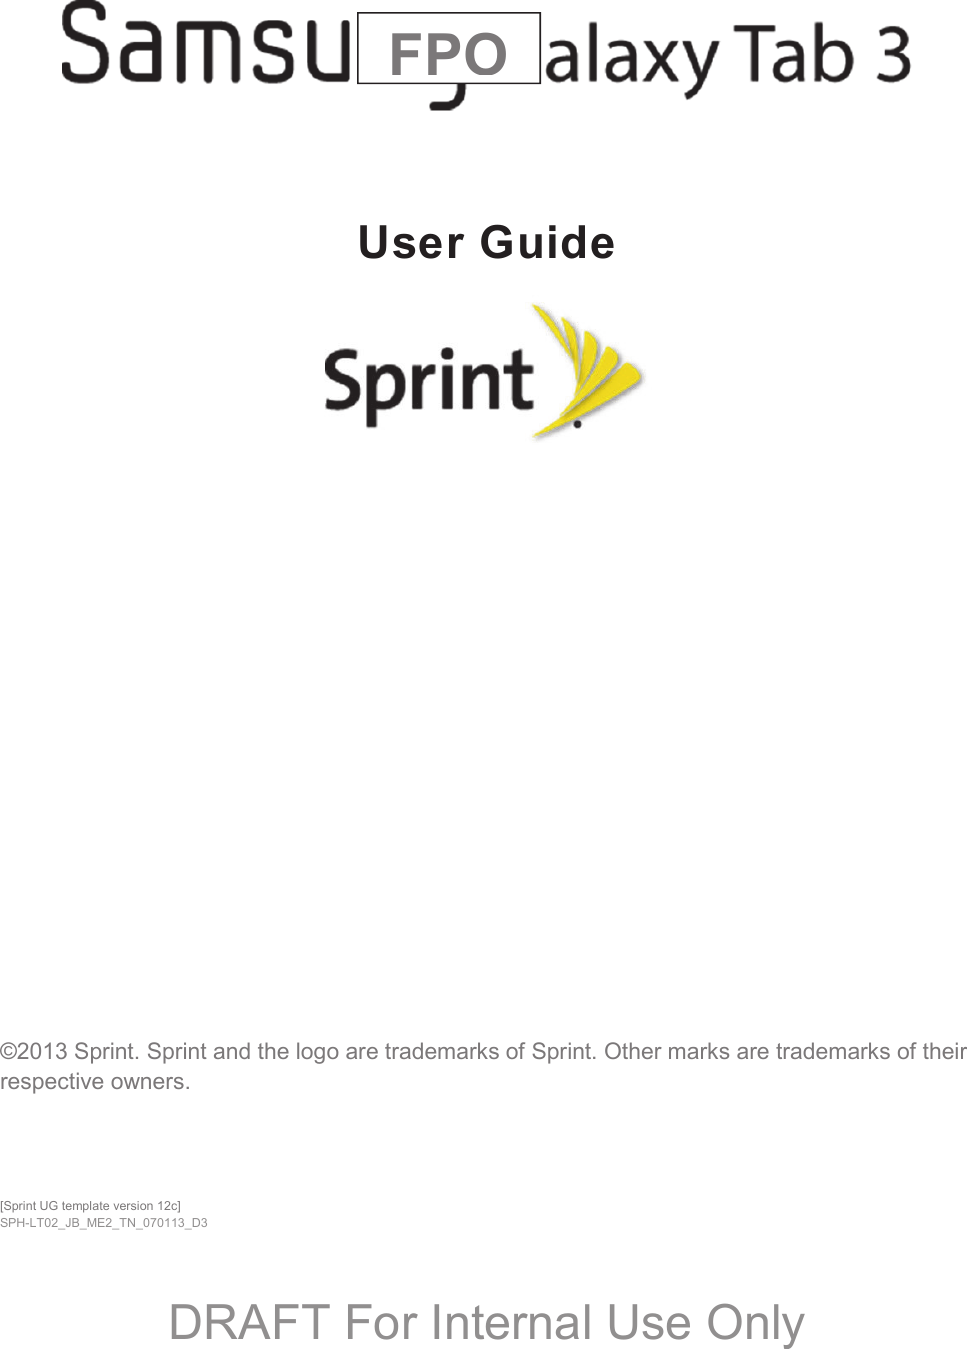   User Guide  ©2013 Sprint. Sprint and the logo are trademarks of Sprint. Other marks are trademarks of their respective owners. [Sprint UG template version 12c] SPH-LT02_JB_ME2_TN_070113_D3  FPODRAFT For Internal Use Only